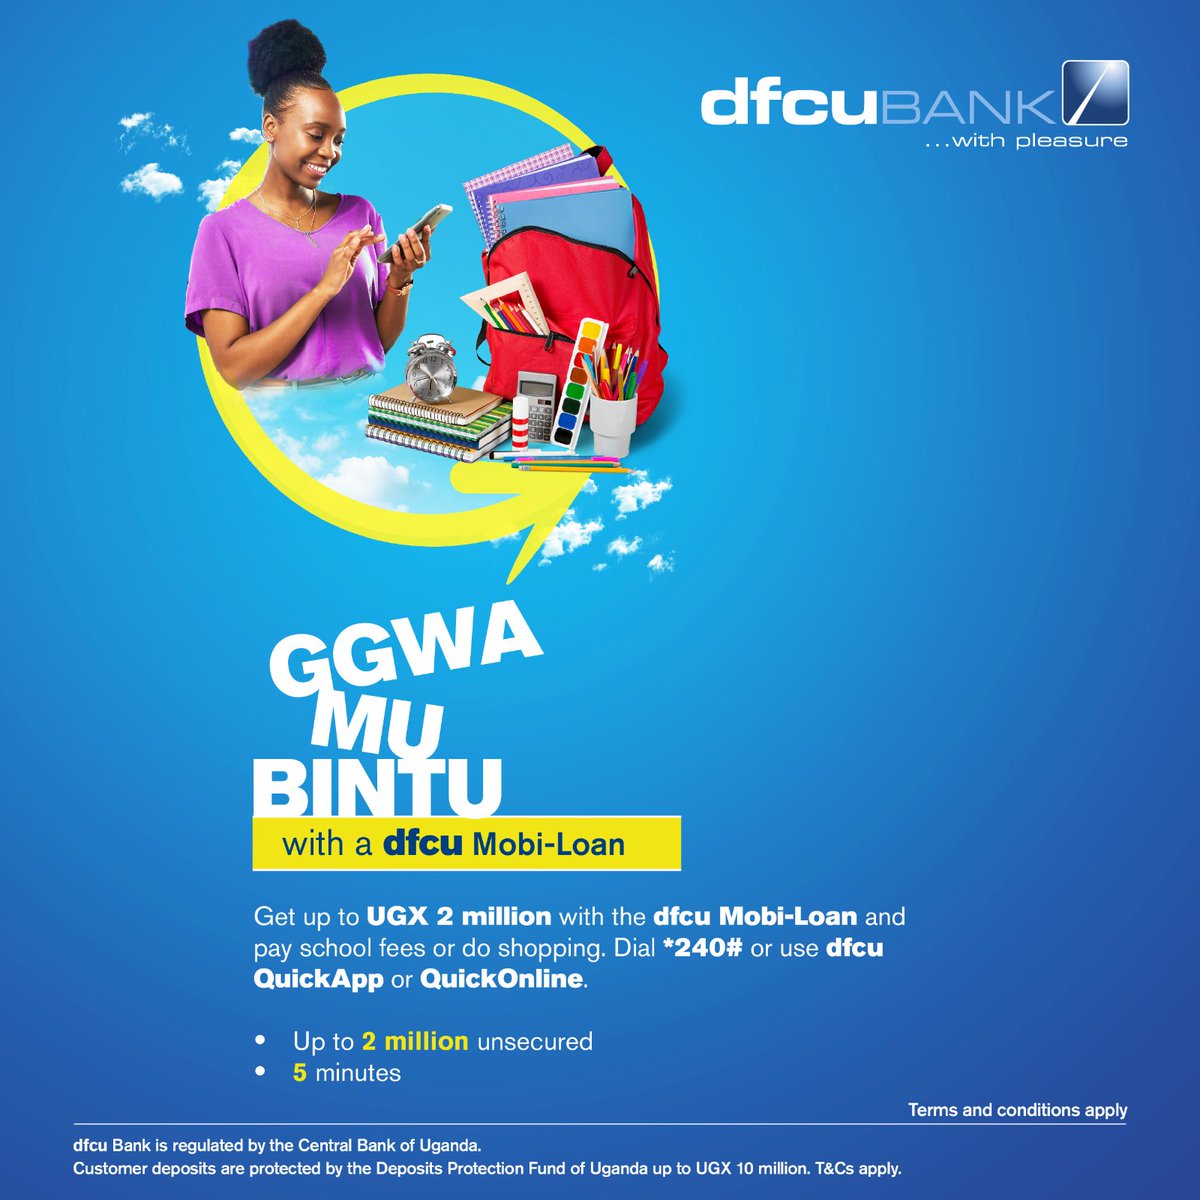 #AD
As the back to School season takes a toll, remember that @dfcugroup is enabling you get access to #dfcuMobiLoan of up to Ugx 2M via dfcu Quick App OR by simply dialing *240# 

More info: dfcugroup.com/promotions
#GwaMuBintu #TransformingLivesAndBusinesses